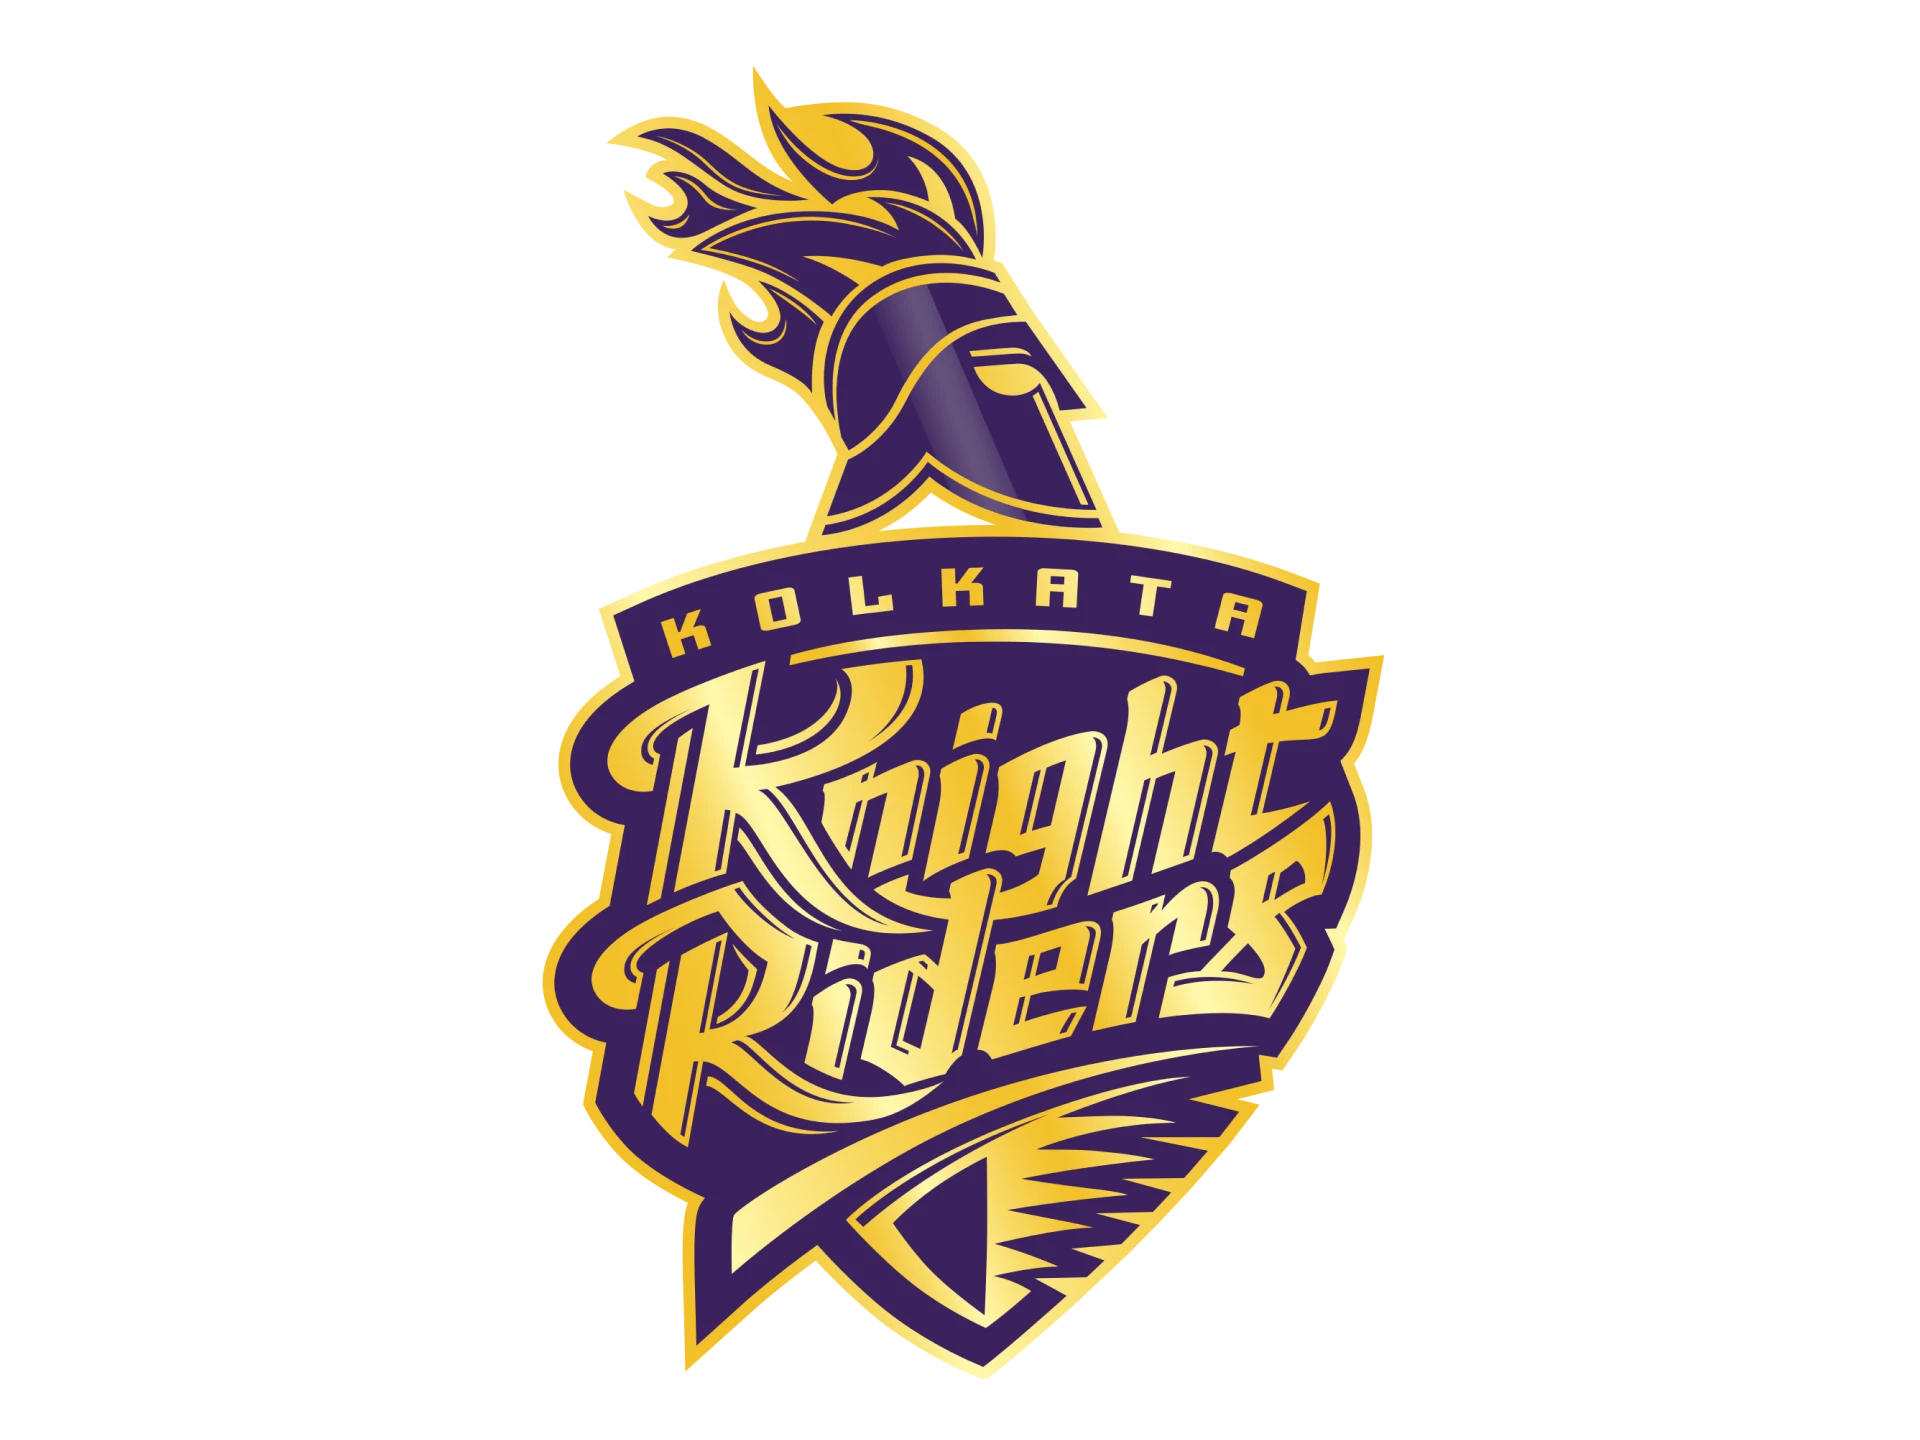 Try betting on Kolkata Knight Riders, maybe they will win the IPL this time.